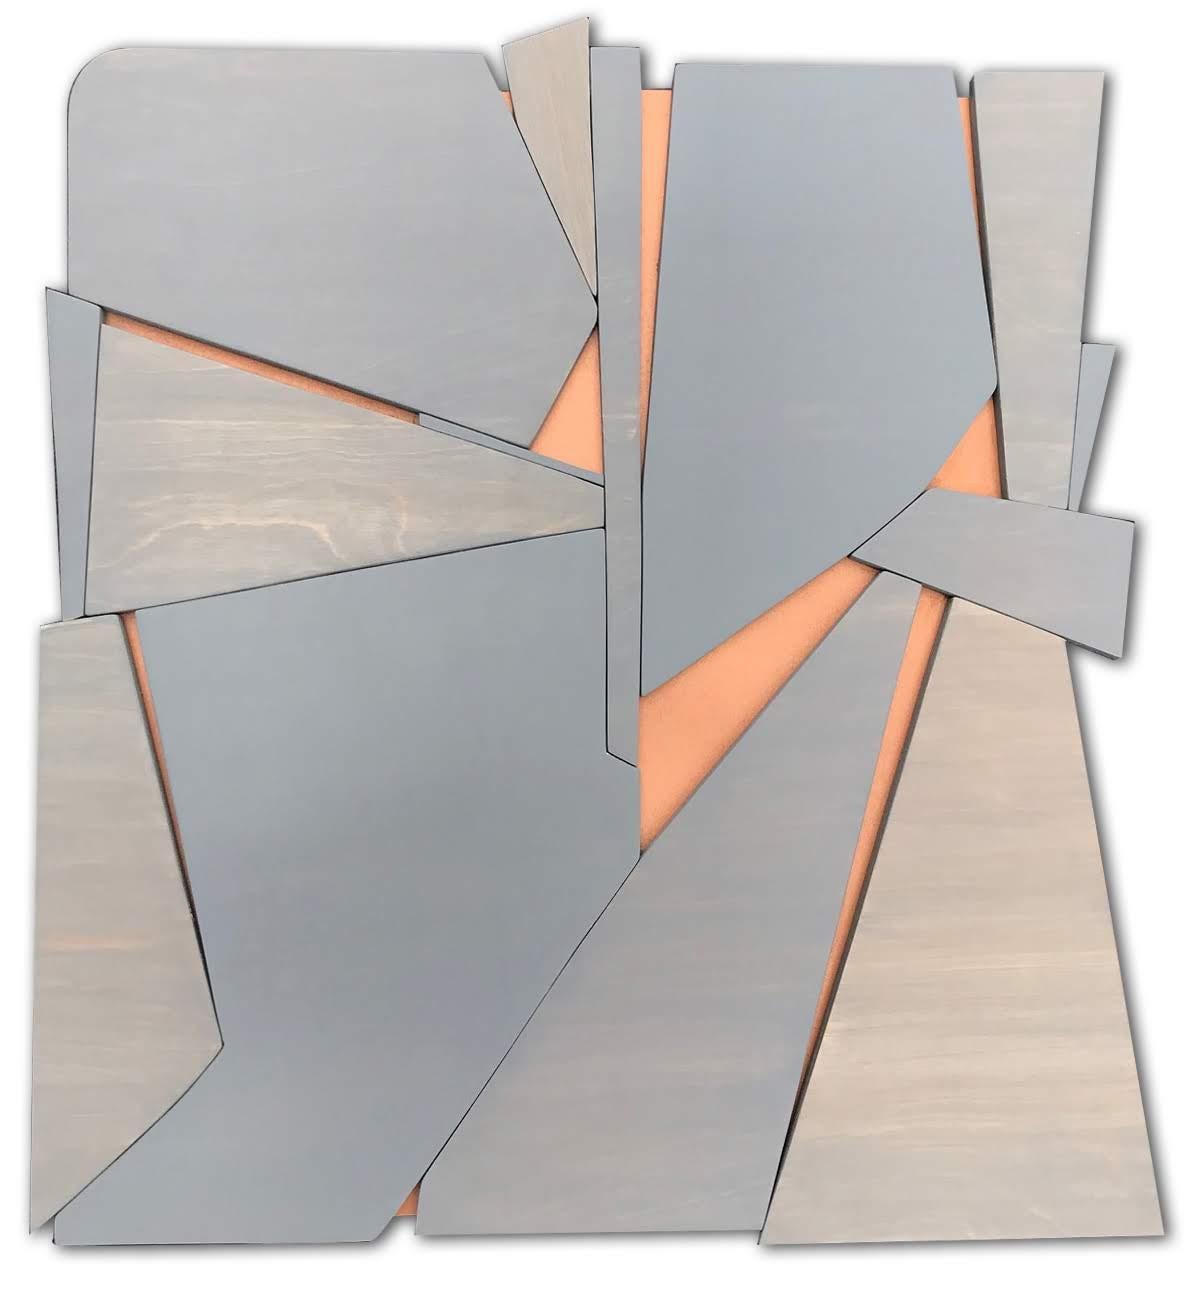 Scott Troxel
Zephyr, 2019
Acrylic washes on birch mounted on mdf painted with metallic enamel . Finished with wax.
24 x 24 x 2/3 in.
(trox012)

This original abstract wooden wall sculpture by Scott Troxel has a mid-century modern sensibility and is